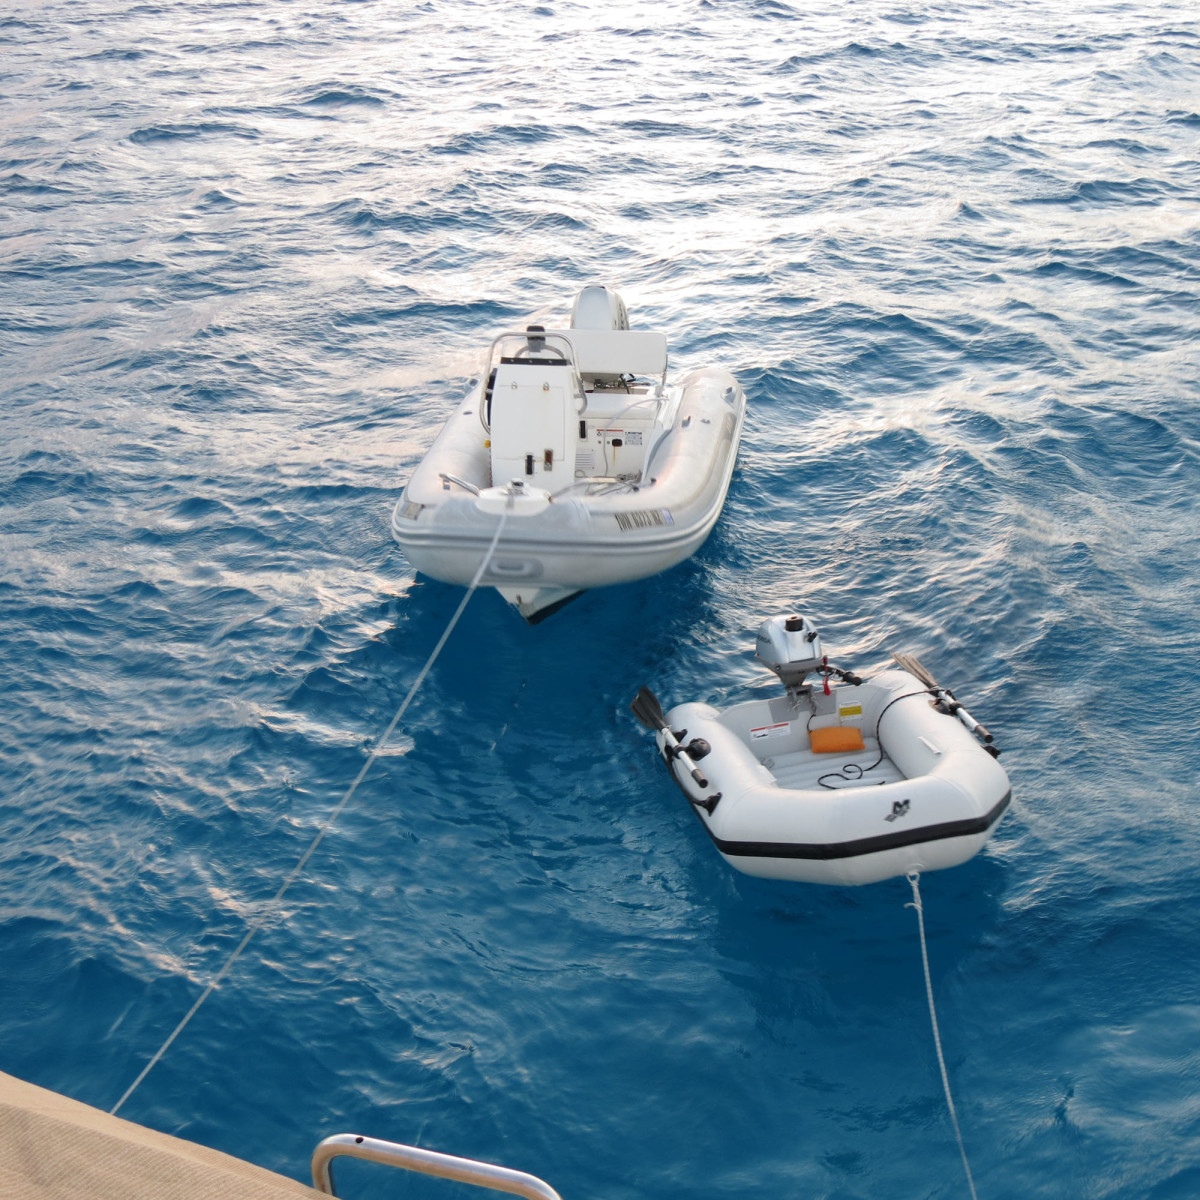 Dirona carries two tenders; a 30-kt AB Tender which gets a lot of use for exploring and transportation as well as the micro-tender which comes in handy in many situations as it is more manageable.